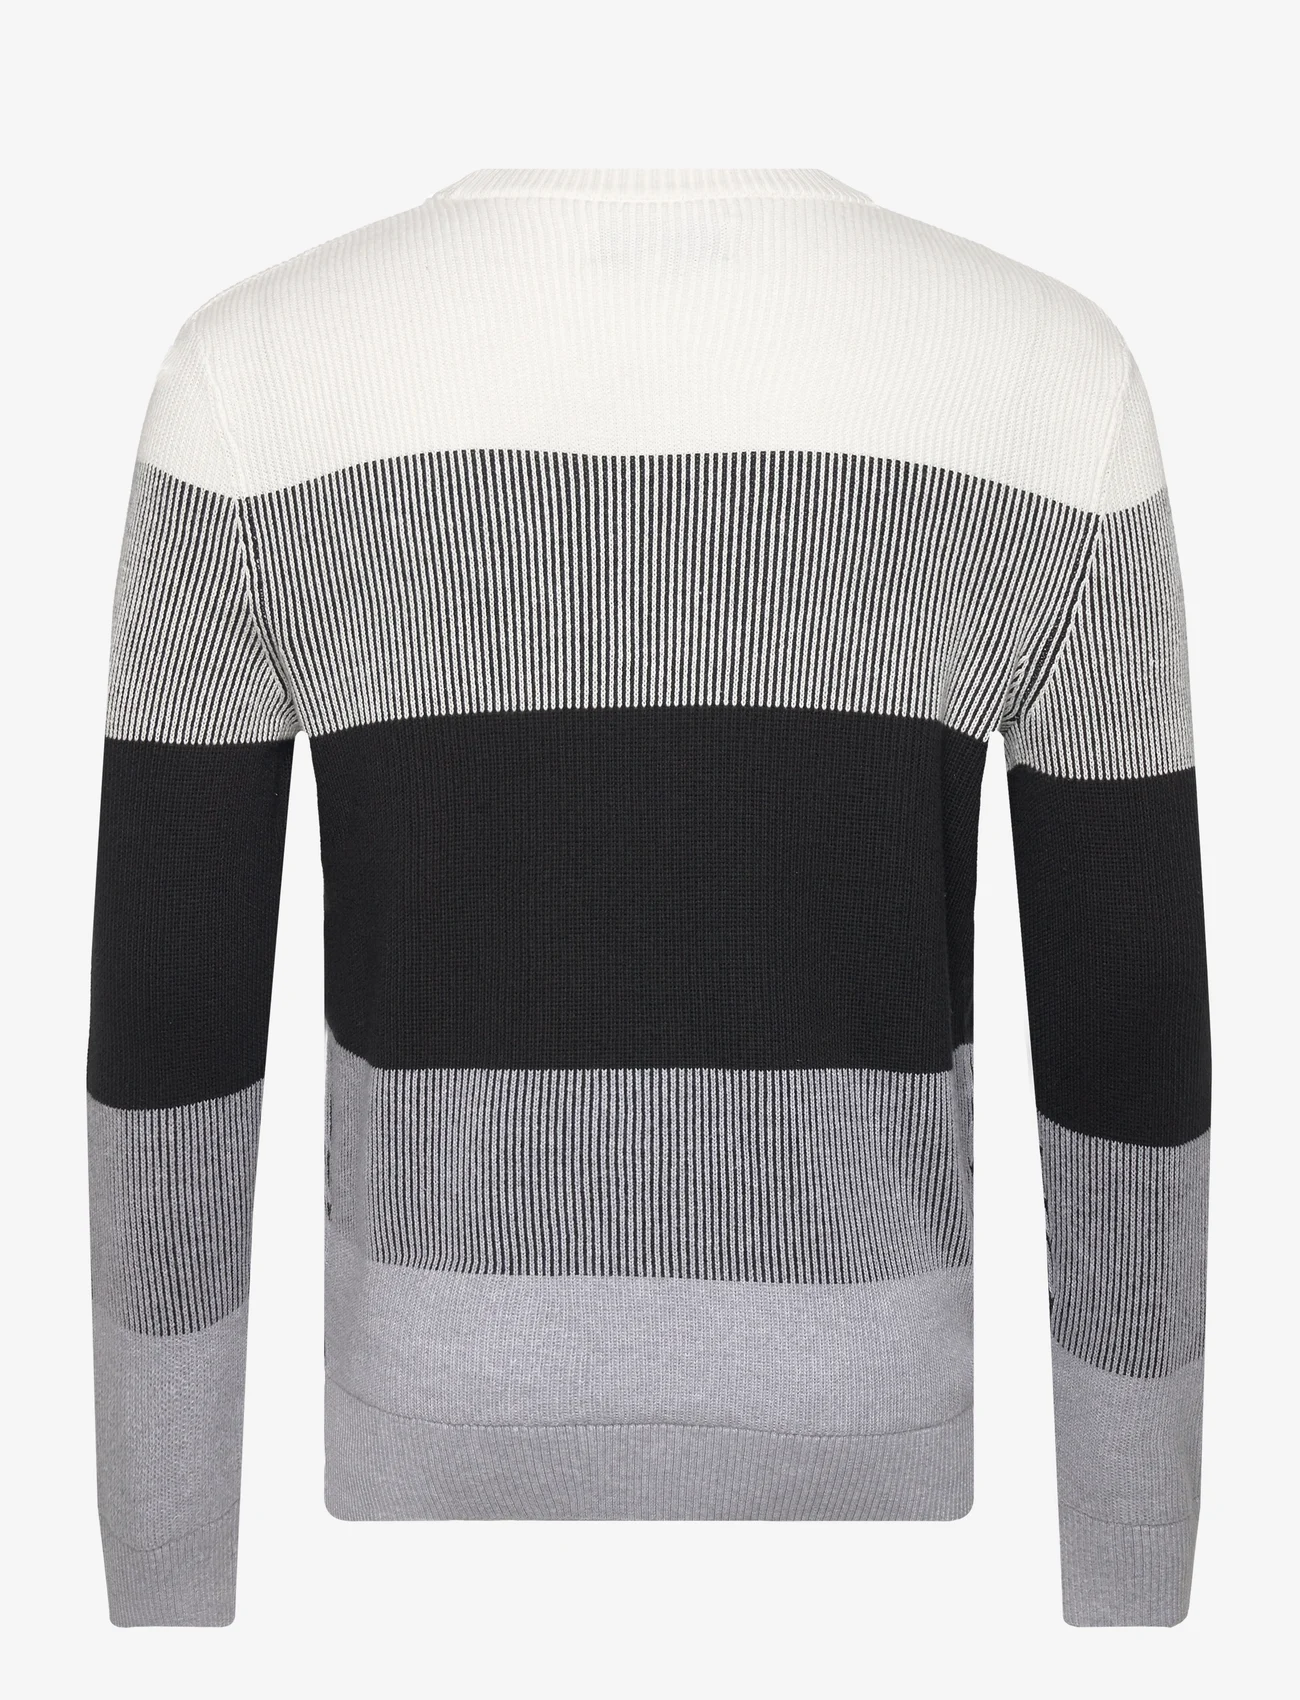 Tom Tailor - structured colorblock  knit - rund hals - white black grey colorblock - 1